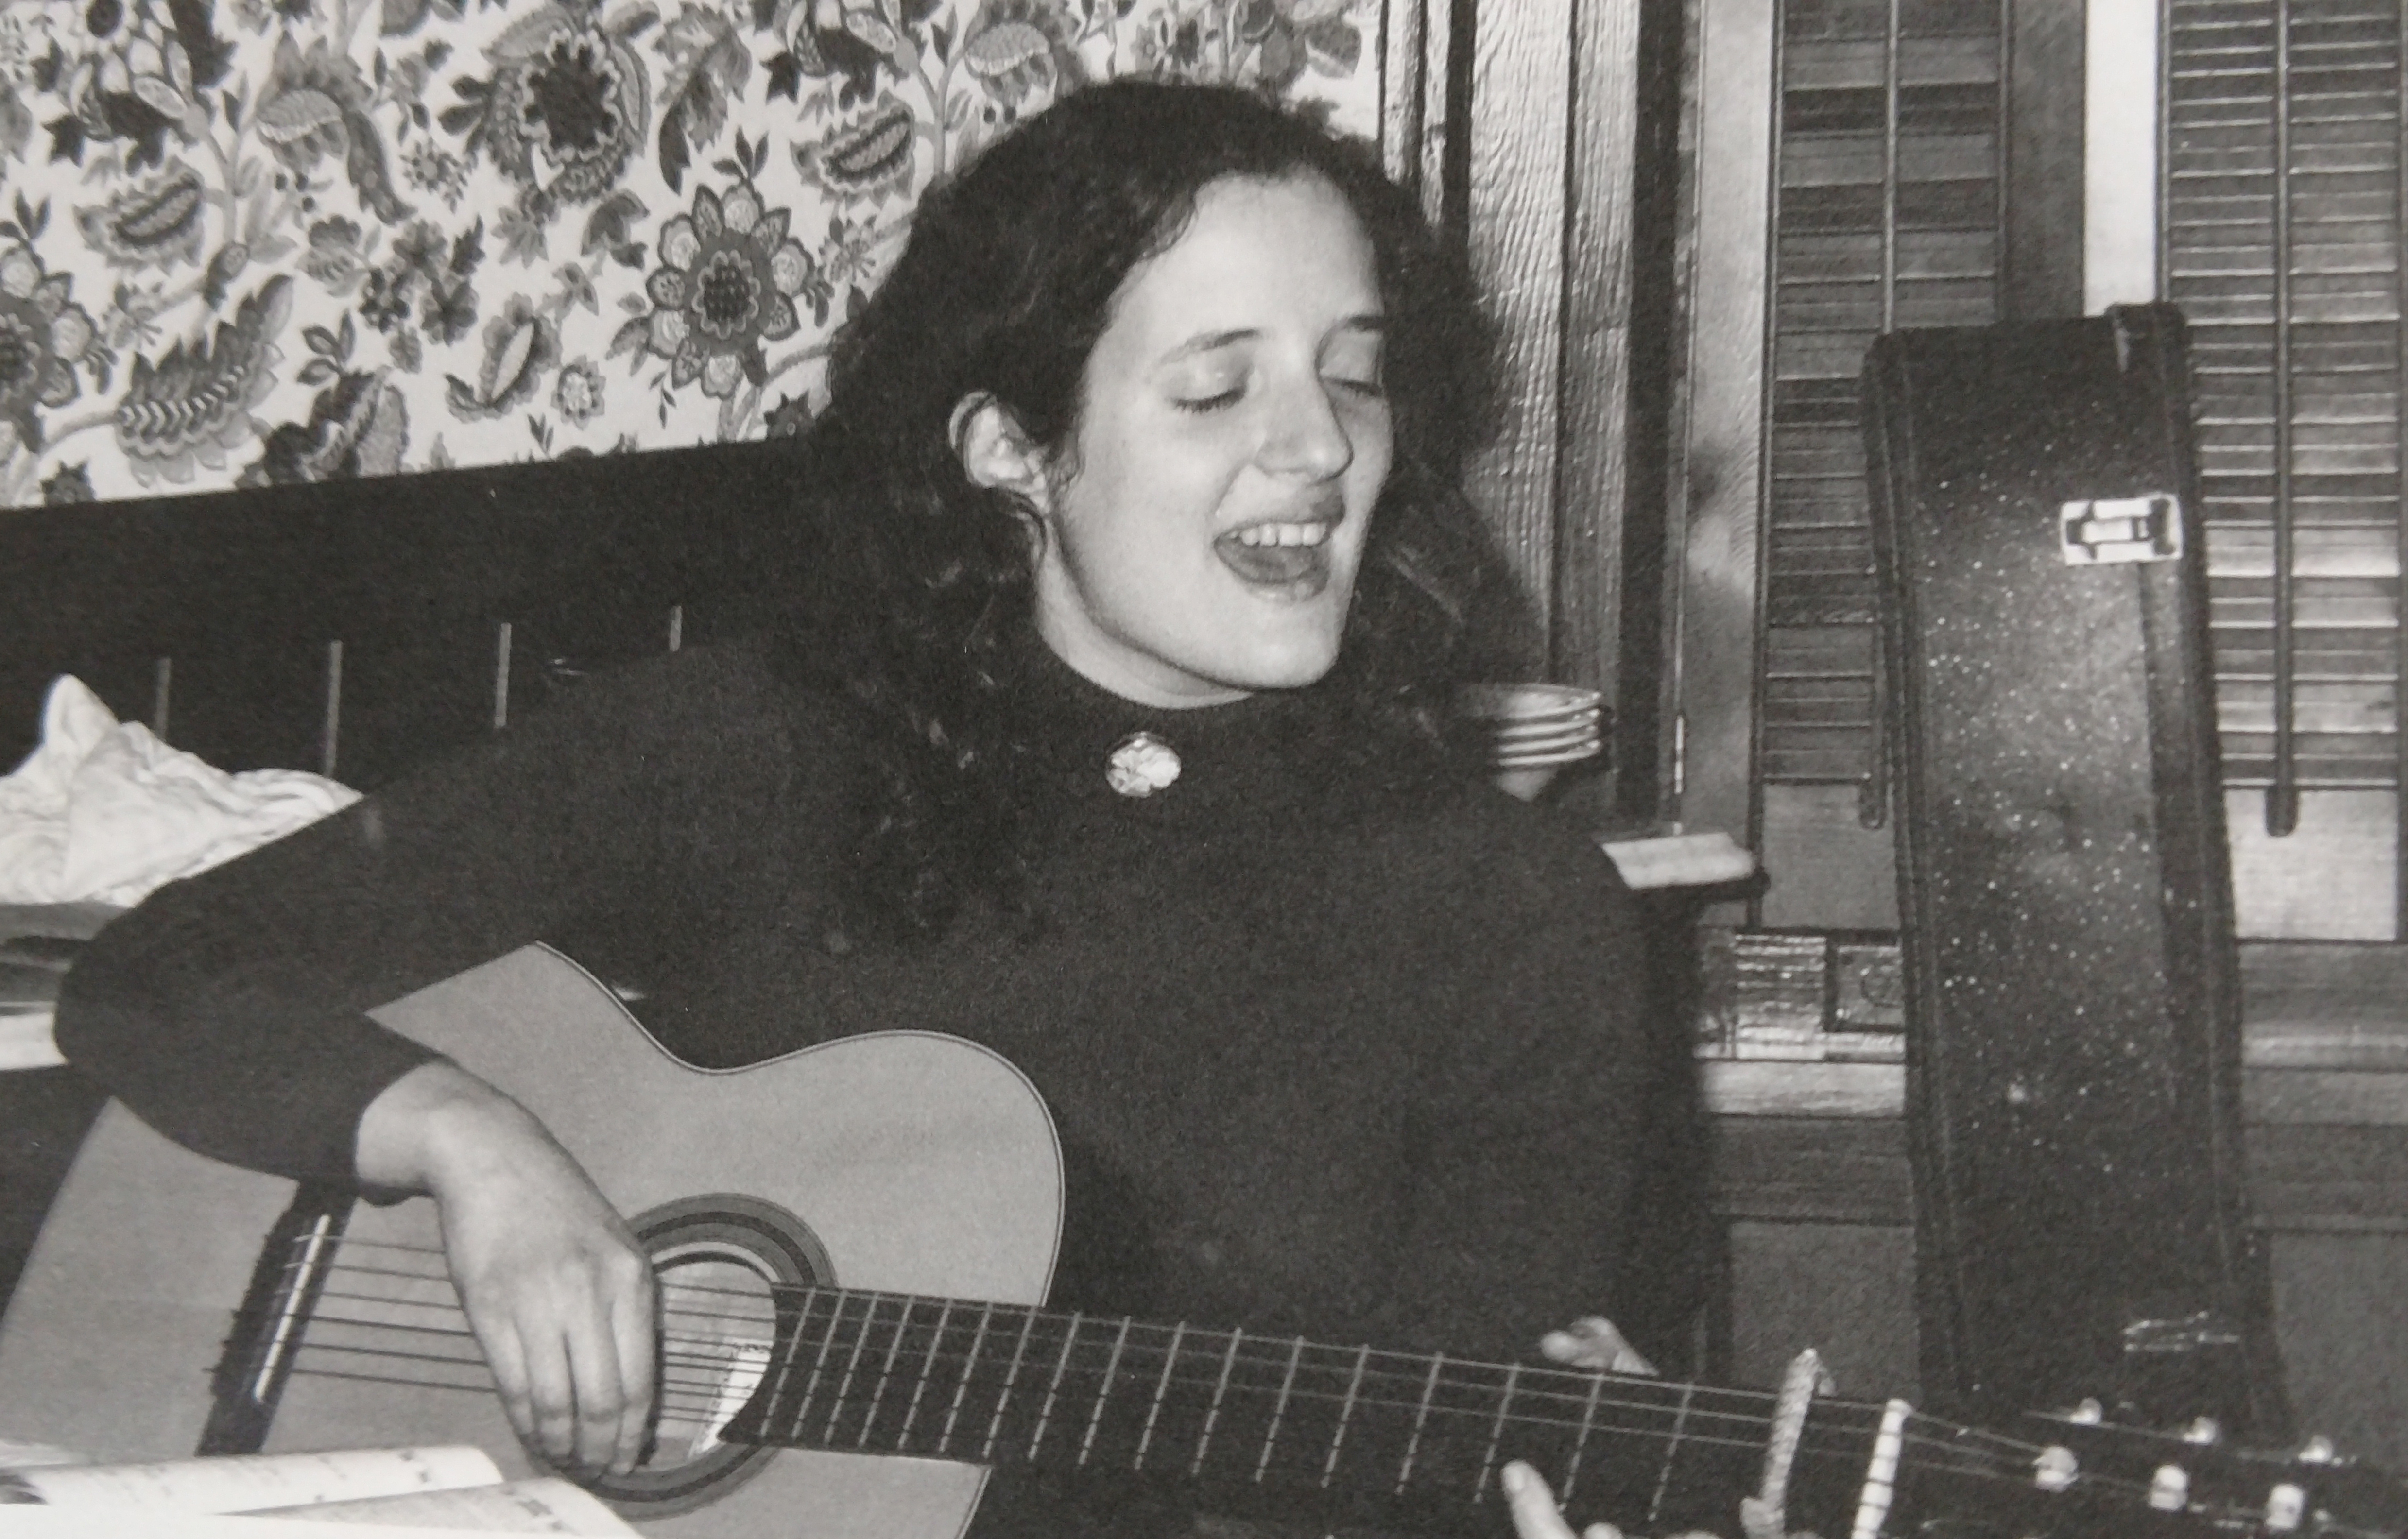 A vintage picture of a woman singing and strumming an acoustic guitar